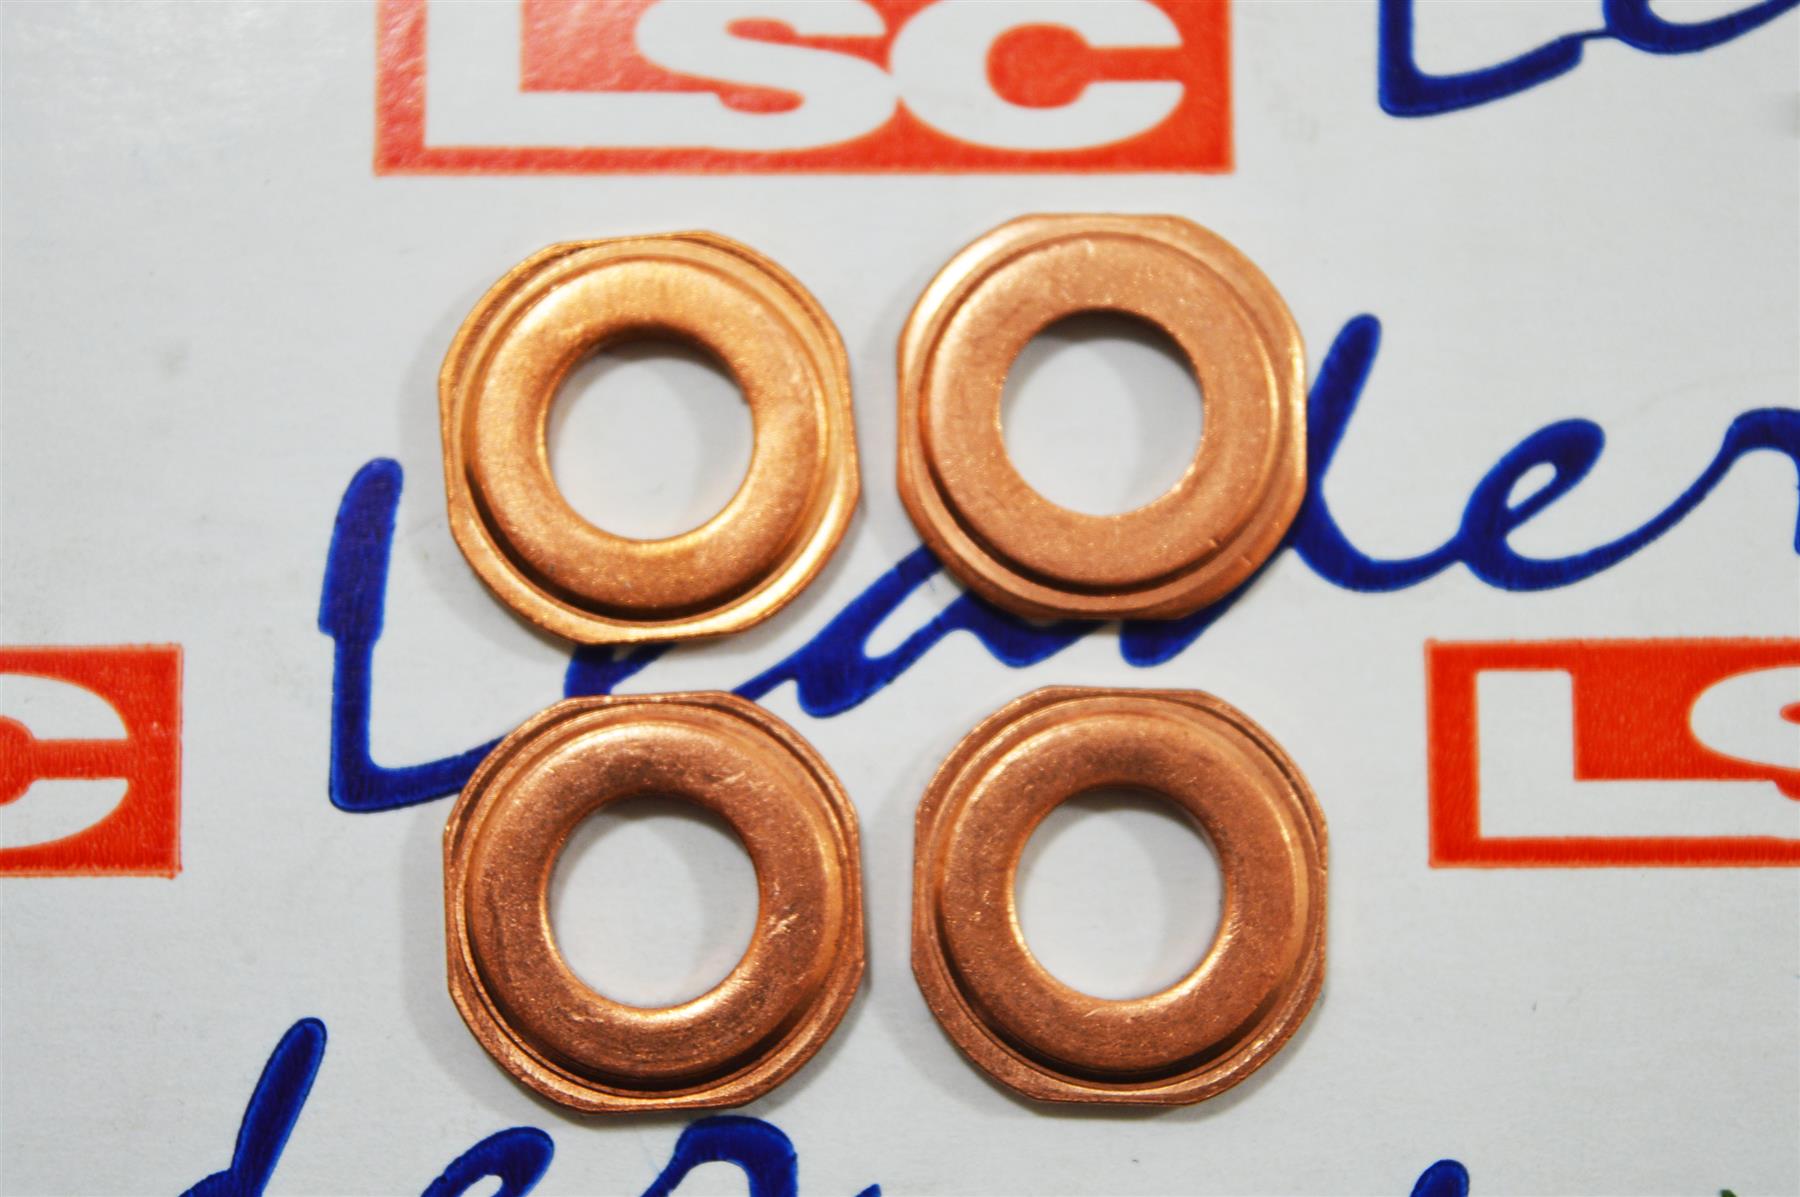 NEW from LSC Genuine Fuel Injector Seals x 4 55578387 